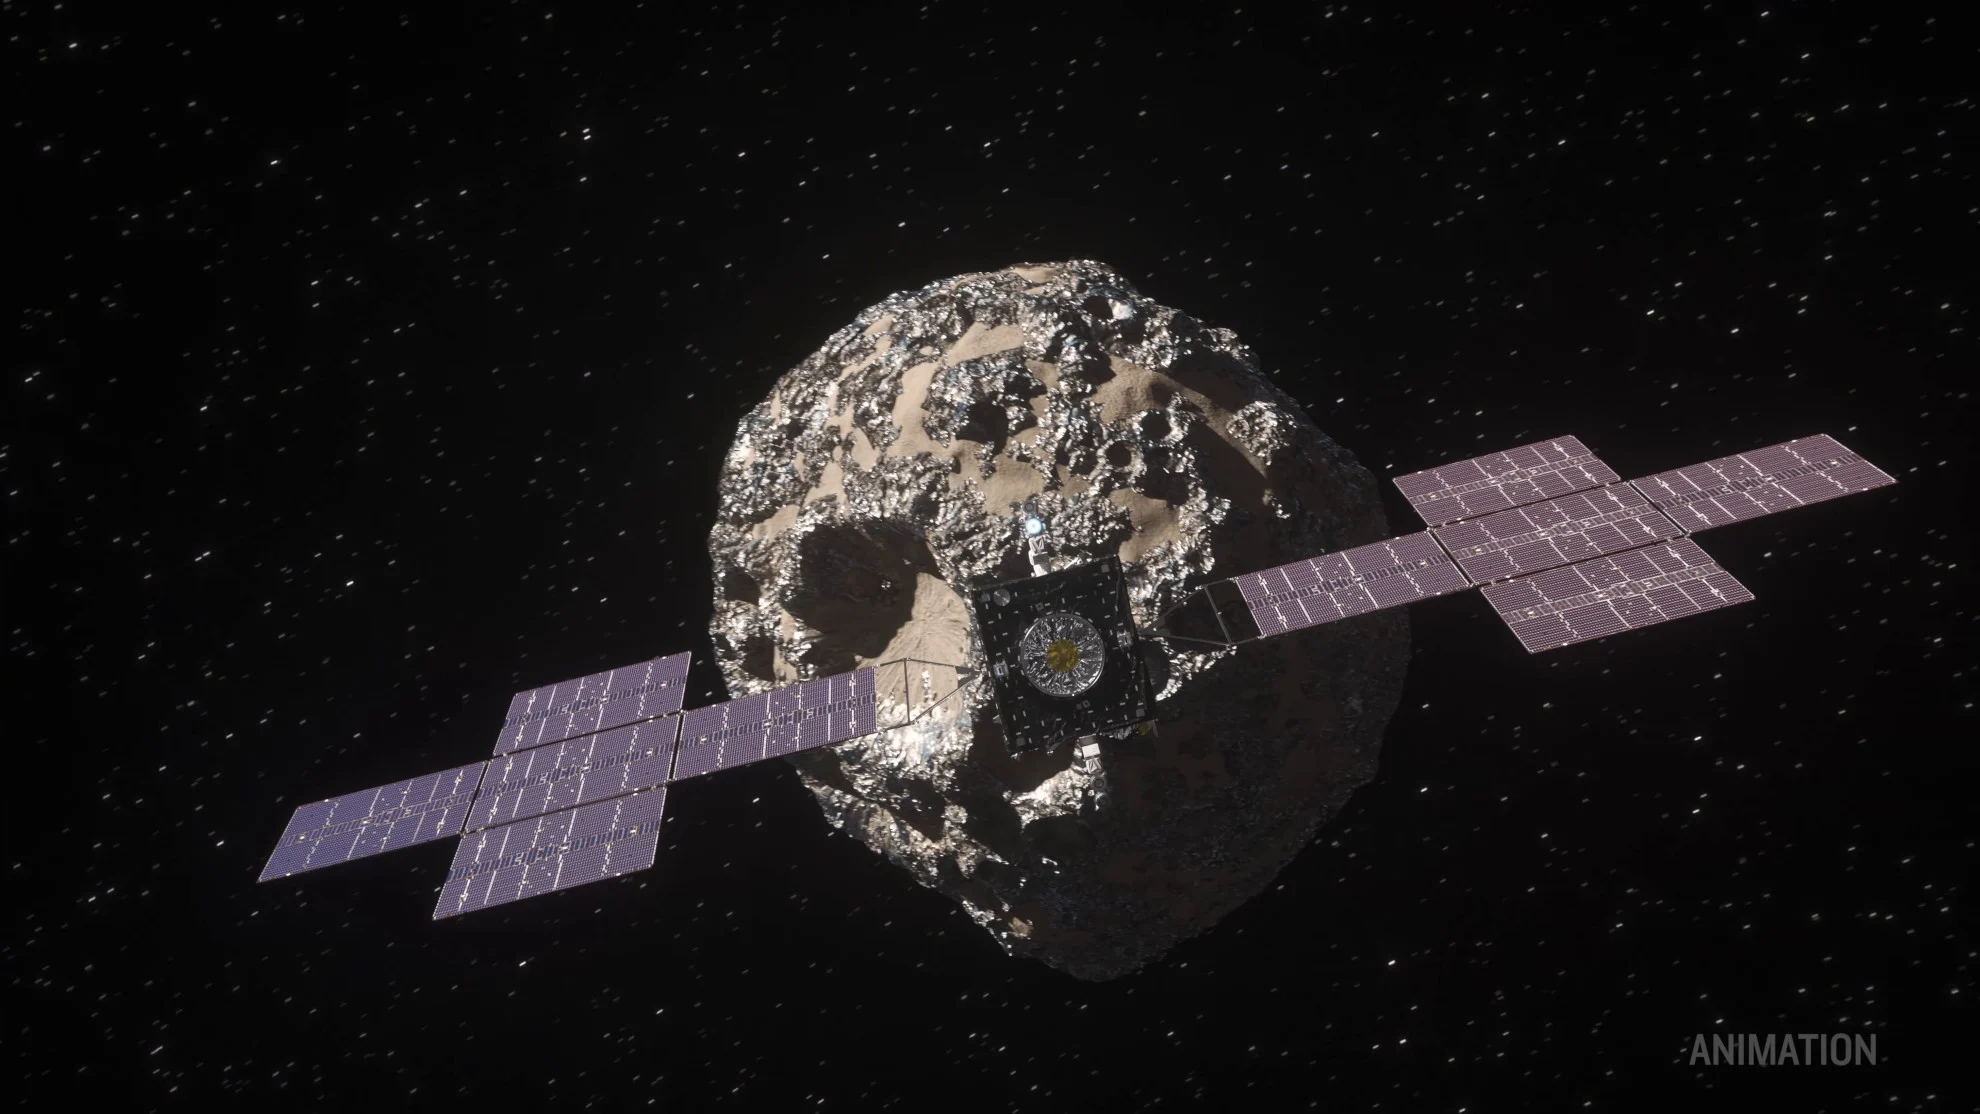 After weather delay, NASA Psyche launches to explore a $10 trillion asteroid